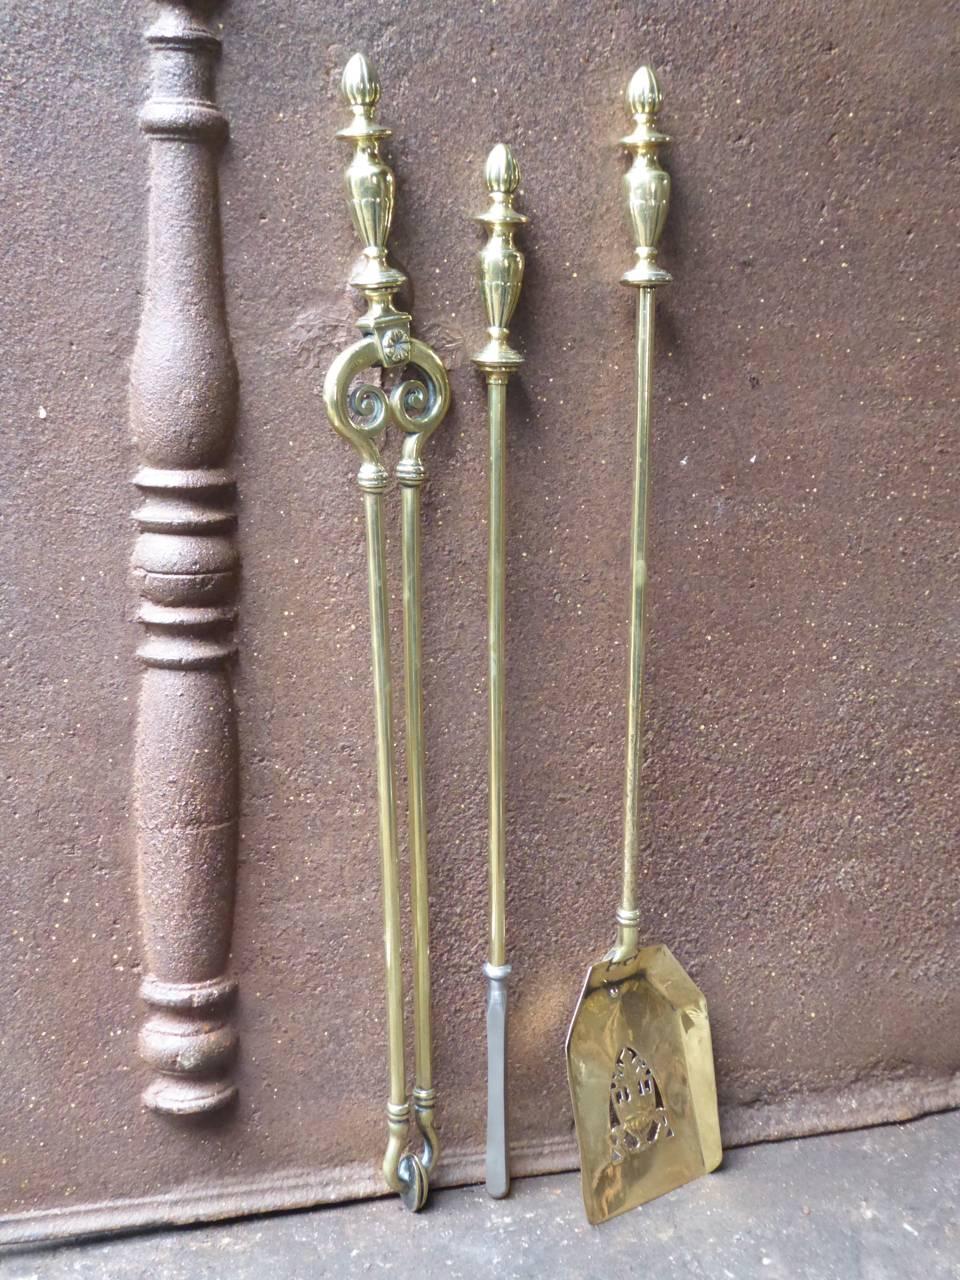 English Victorian fireplace tool set - fire irons made of brass and polished steel.

We have a unique and specialized collection of antique and used fireplace accessories consisting of more than 1000 listings at 1stdibs. Amongst others we always